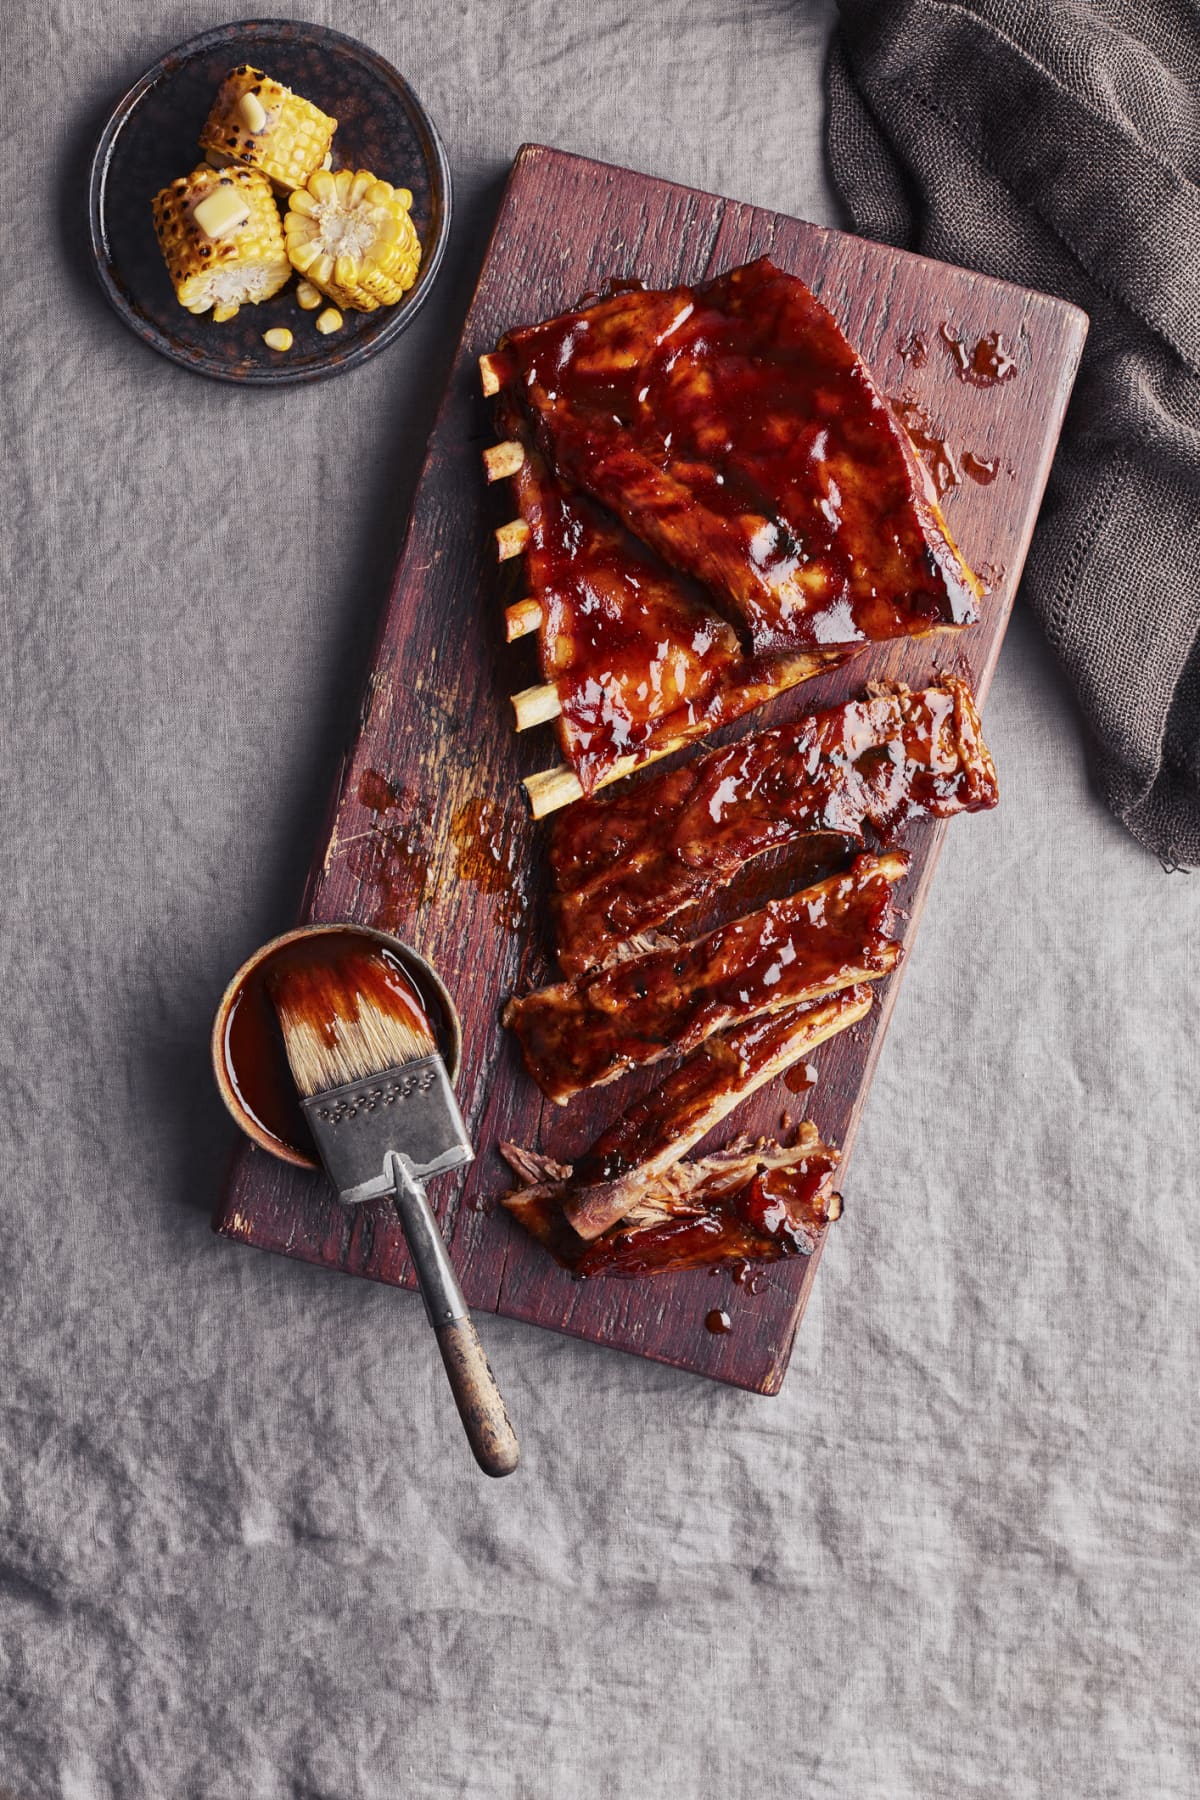 Barbecued pork ribs on wooden cutting board